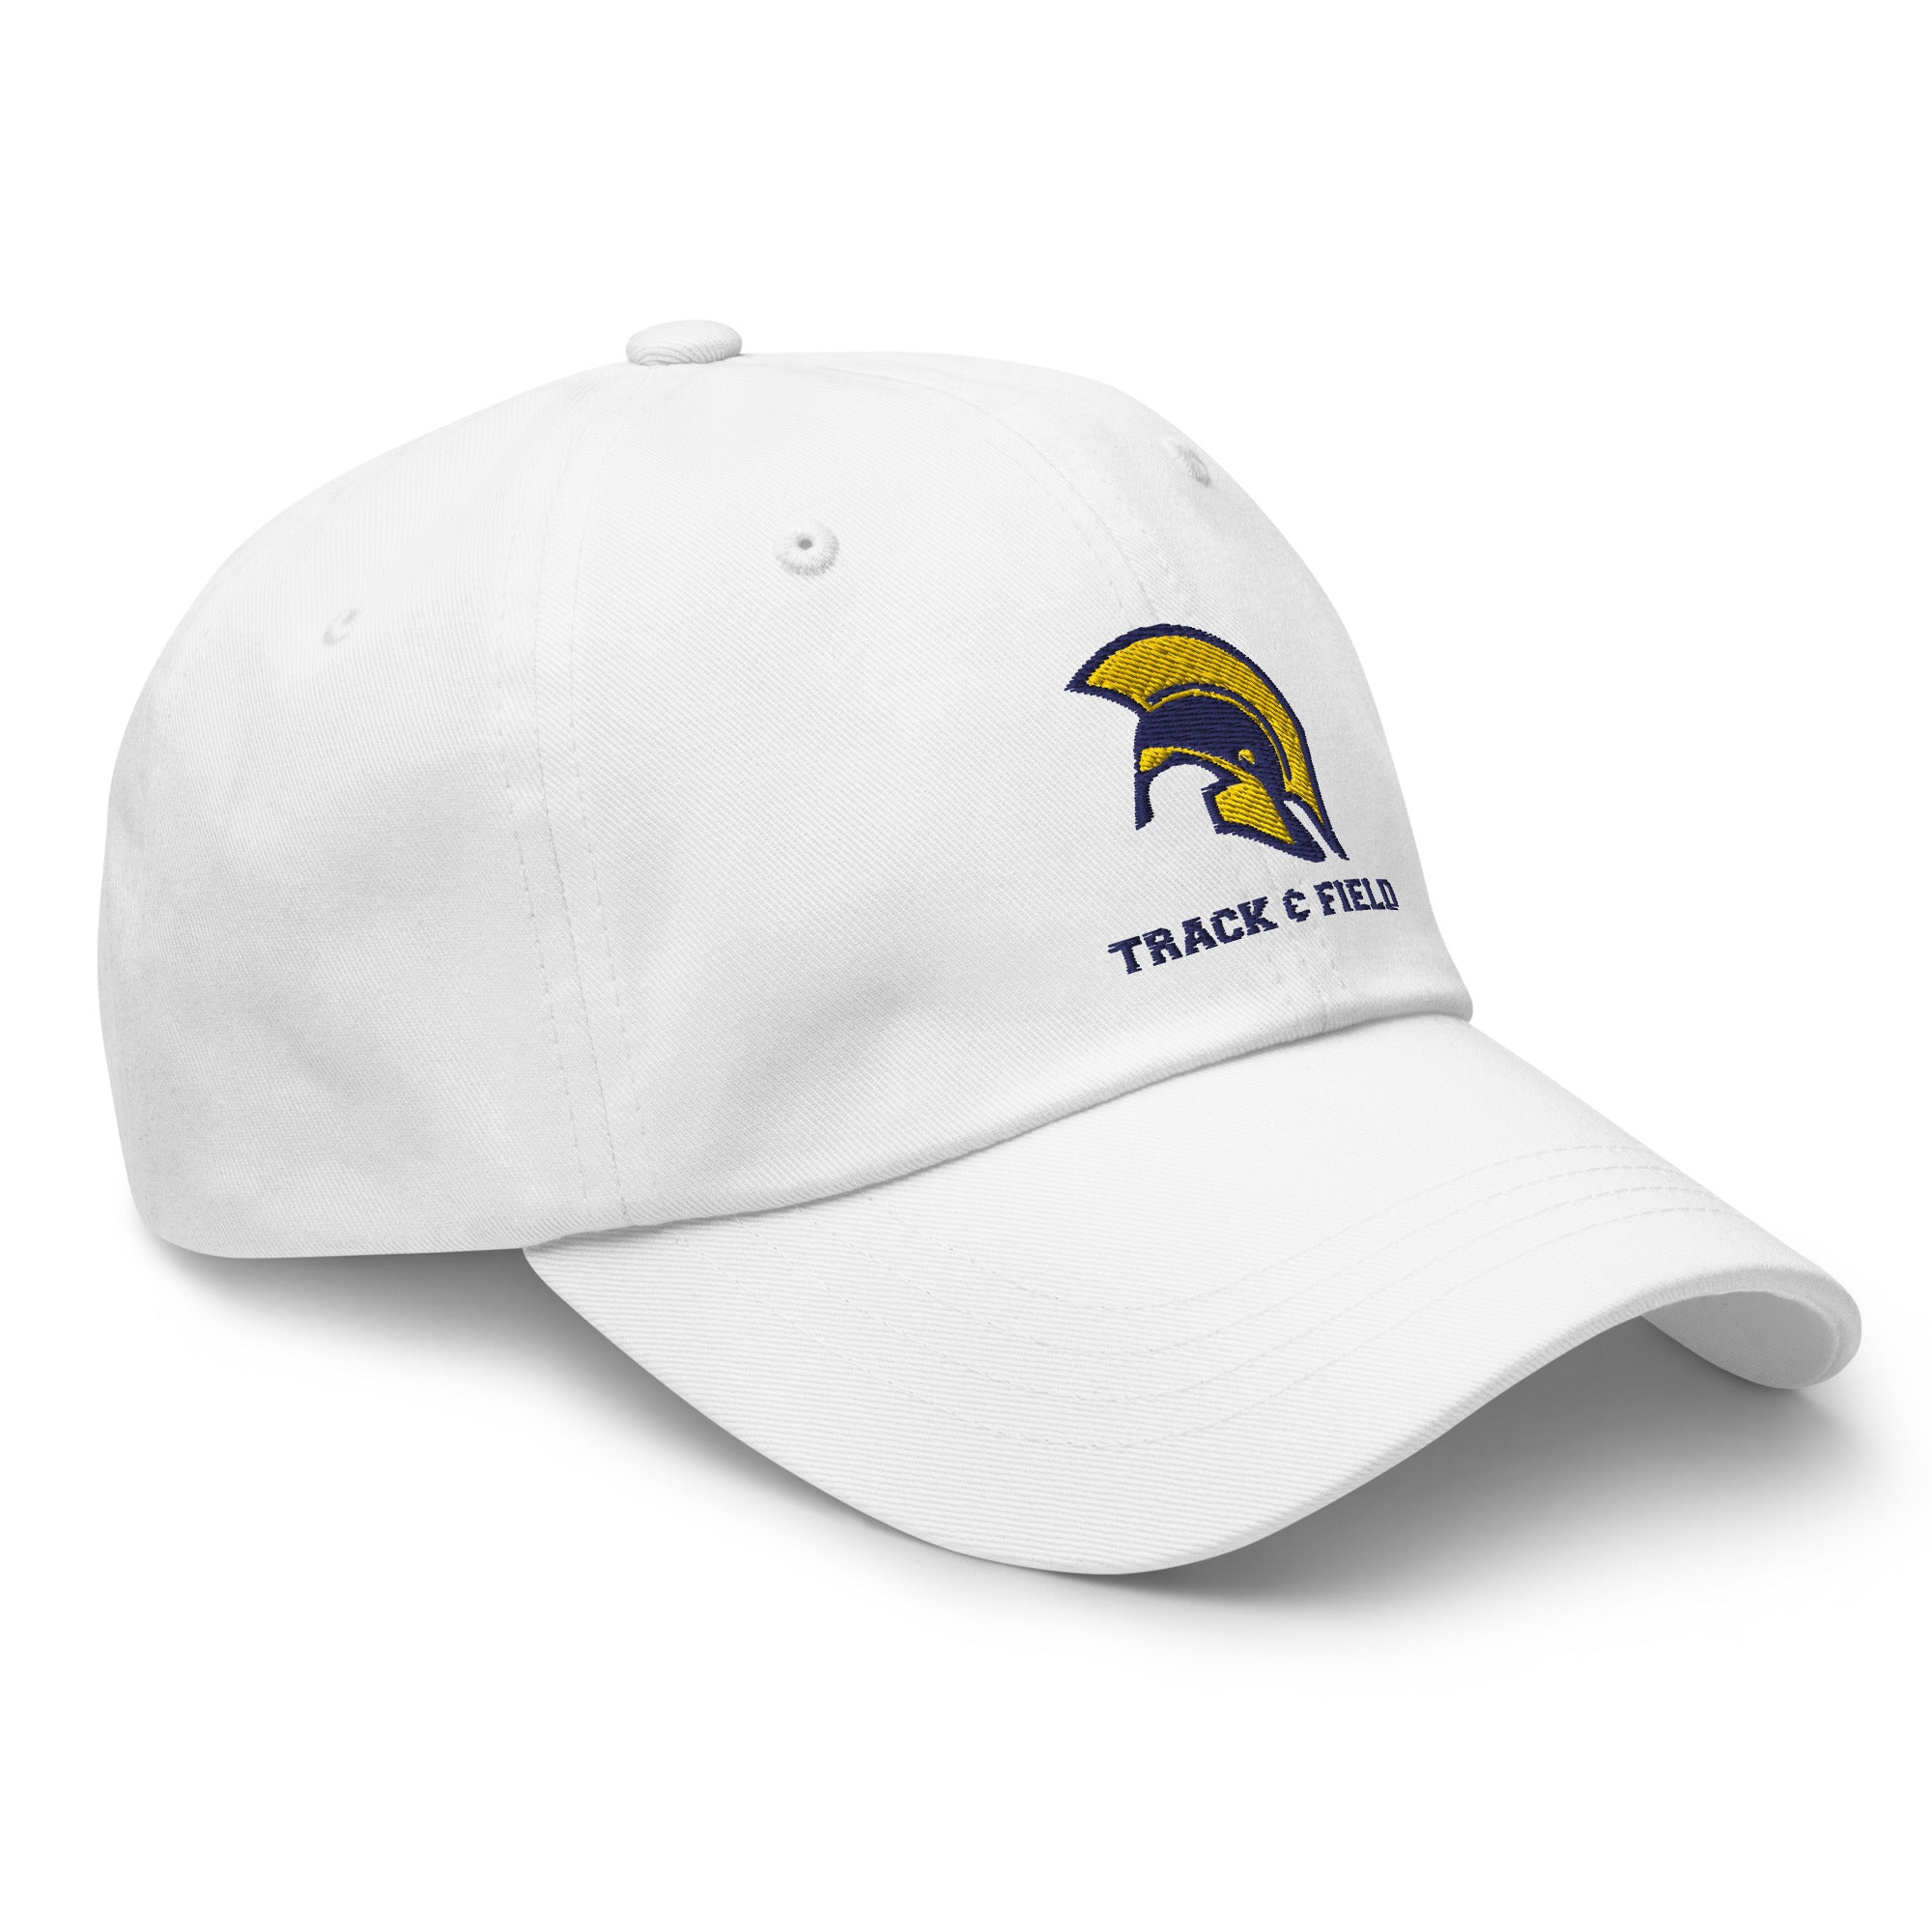 St. Mary's Dad hat